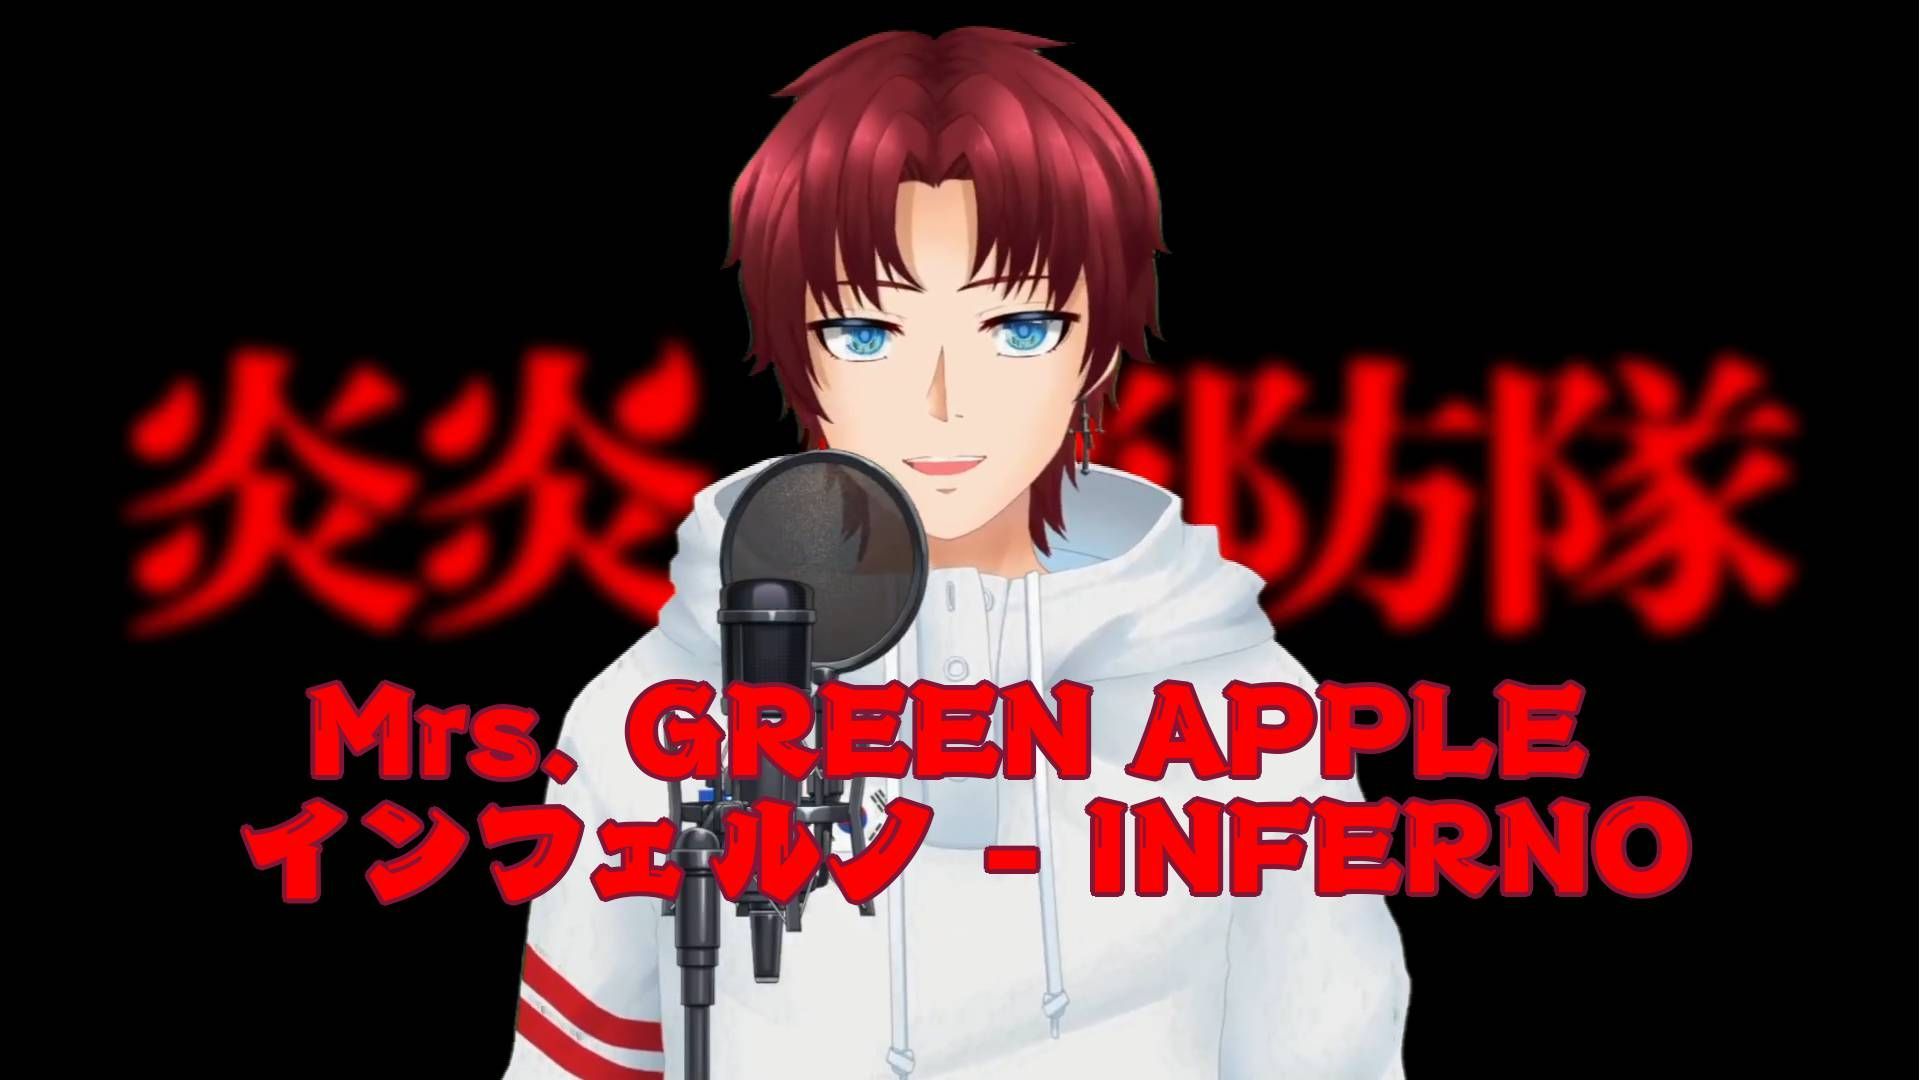 OPENING FIRE FORCE [Mrs. GREEN APPLE - インフェルノ | INFERNO] COVER BY LAGANN  FITZGERALD #Vcreators - Bilibili